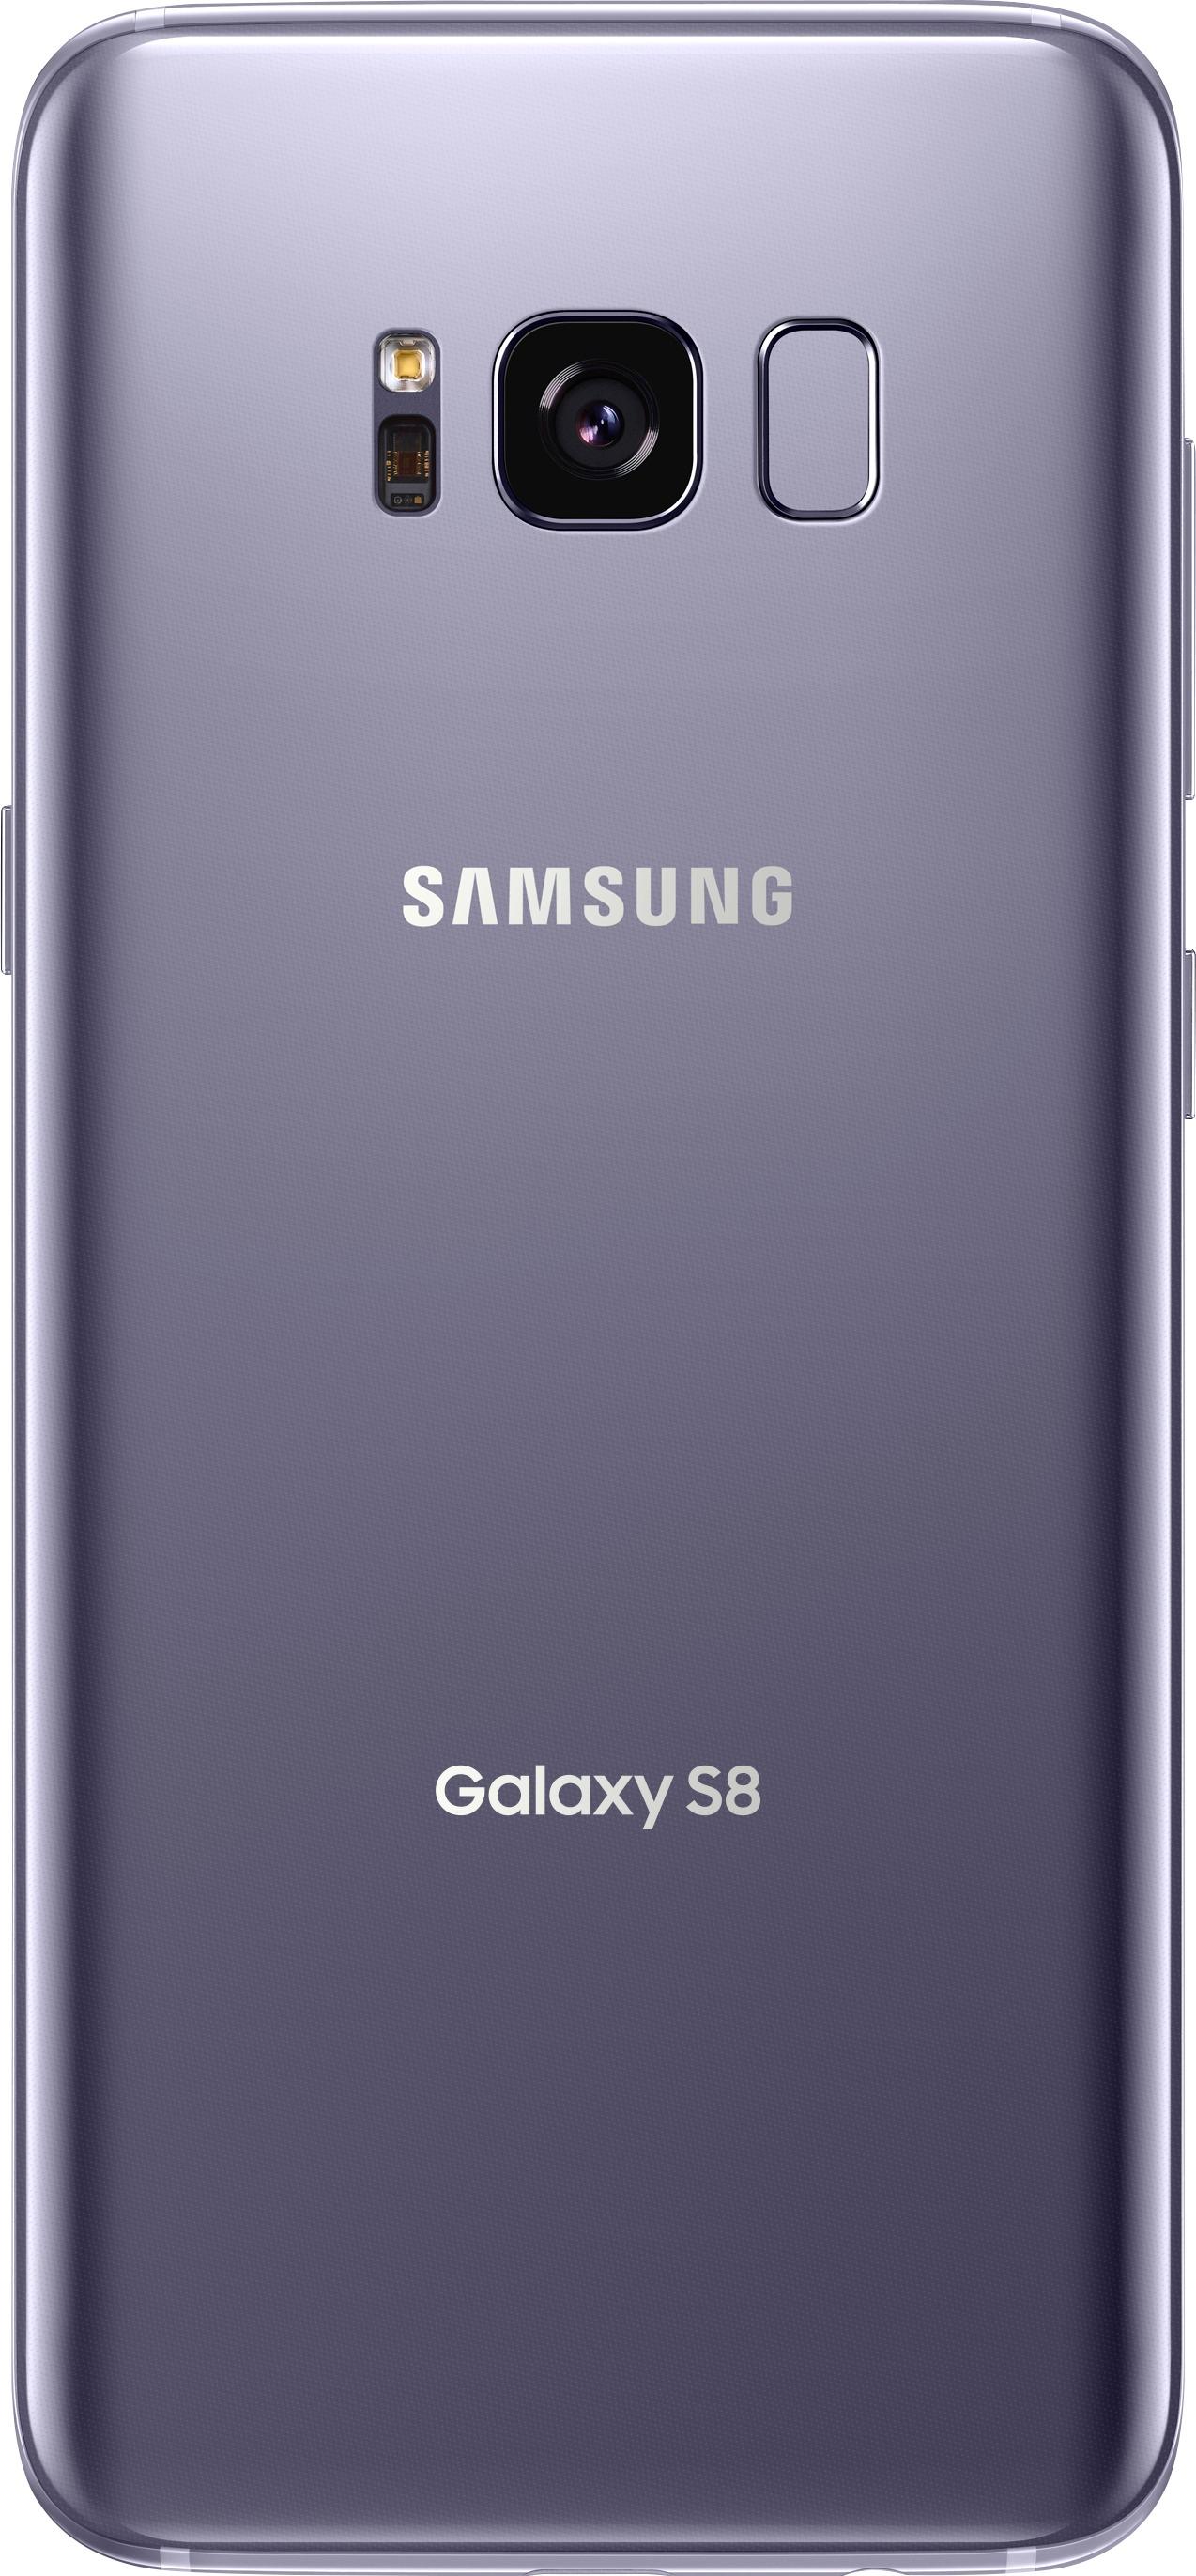 Best Buy Samsung Refurbished Galaxy S8 4g Lte With 64gb Memory Cell Phone Orchid Gray Verizon 2826